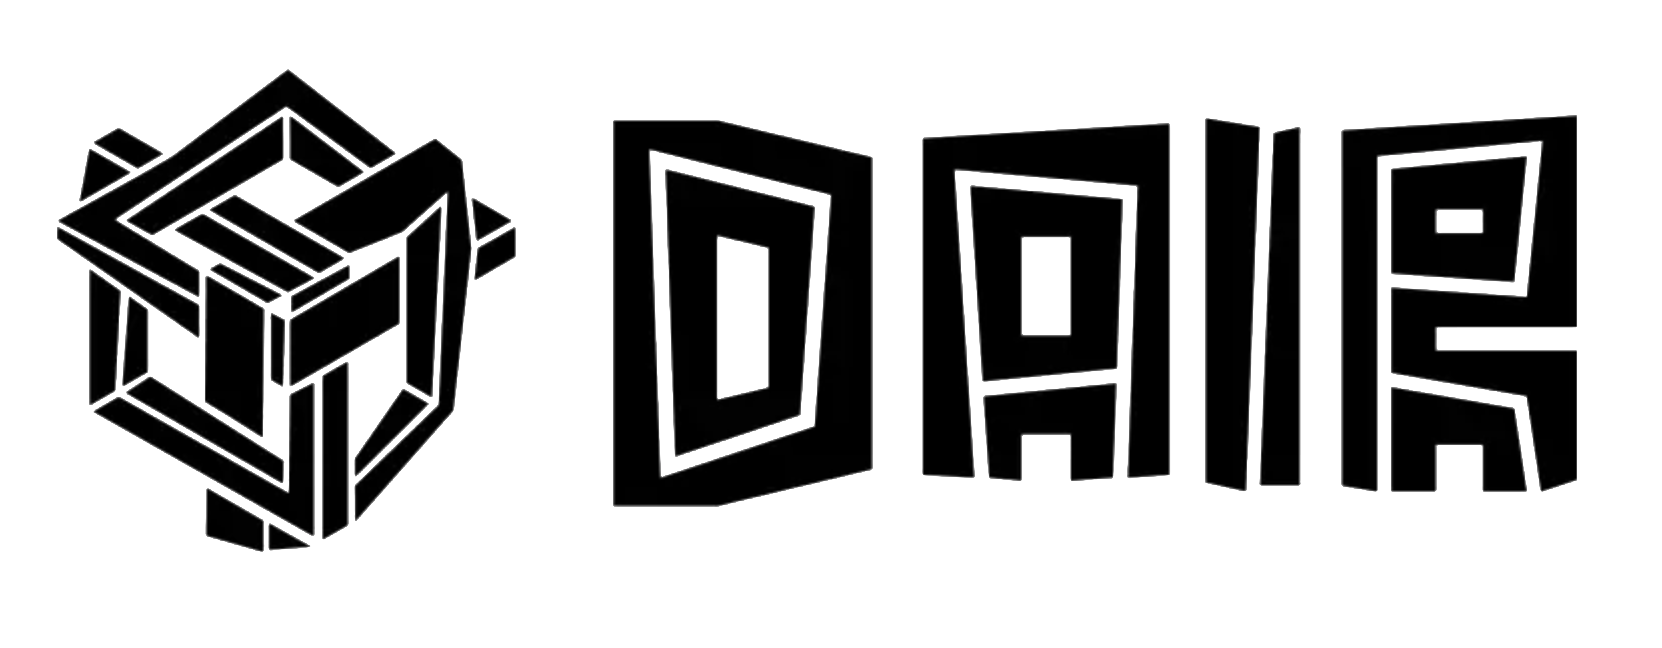 The Dair Logo. Entagled squares in black with the name next to it.